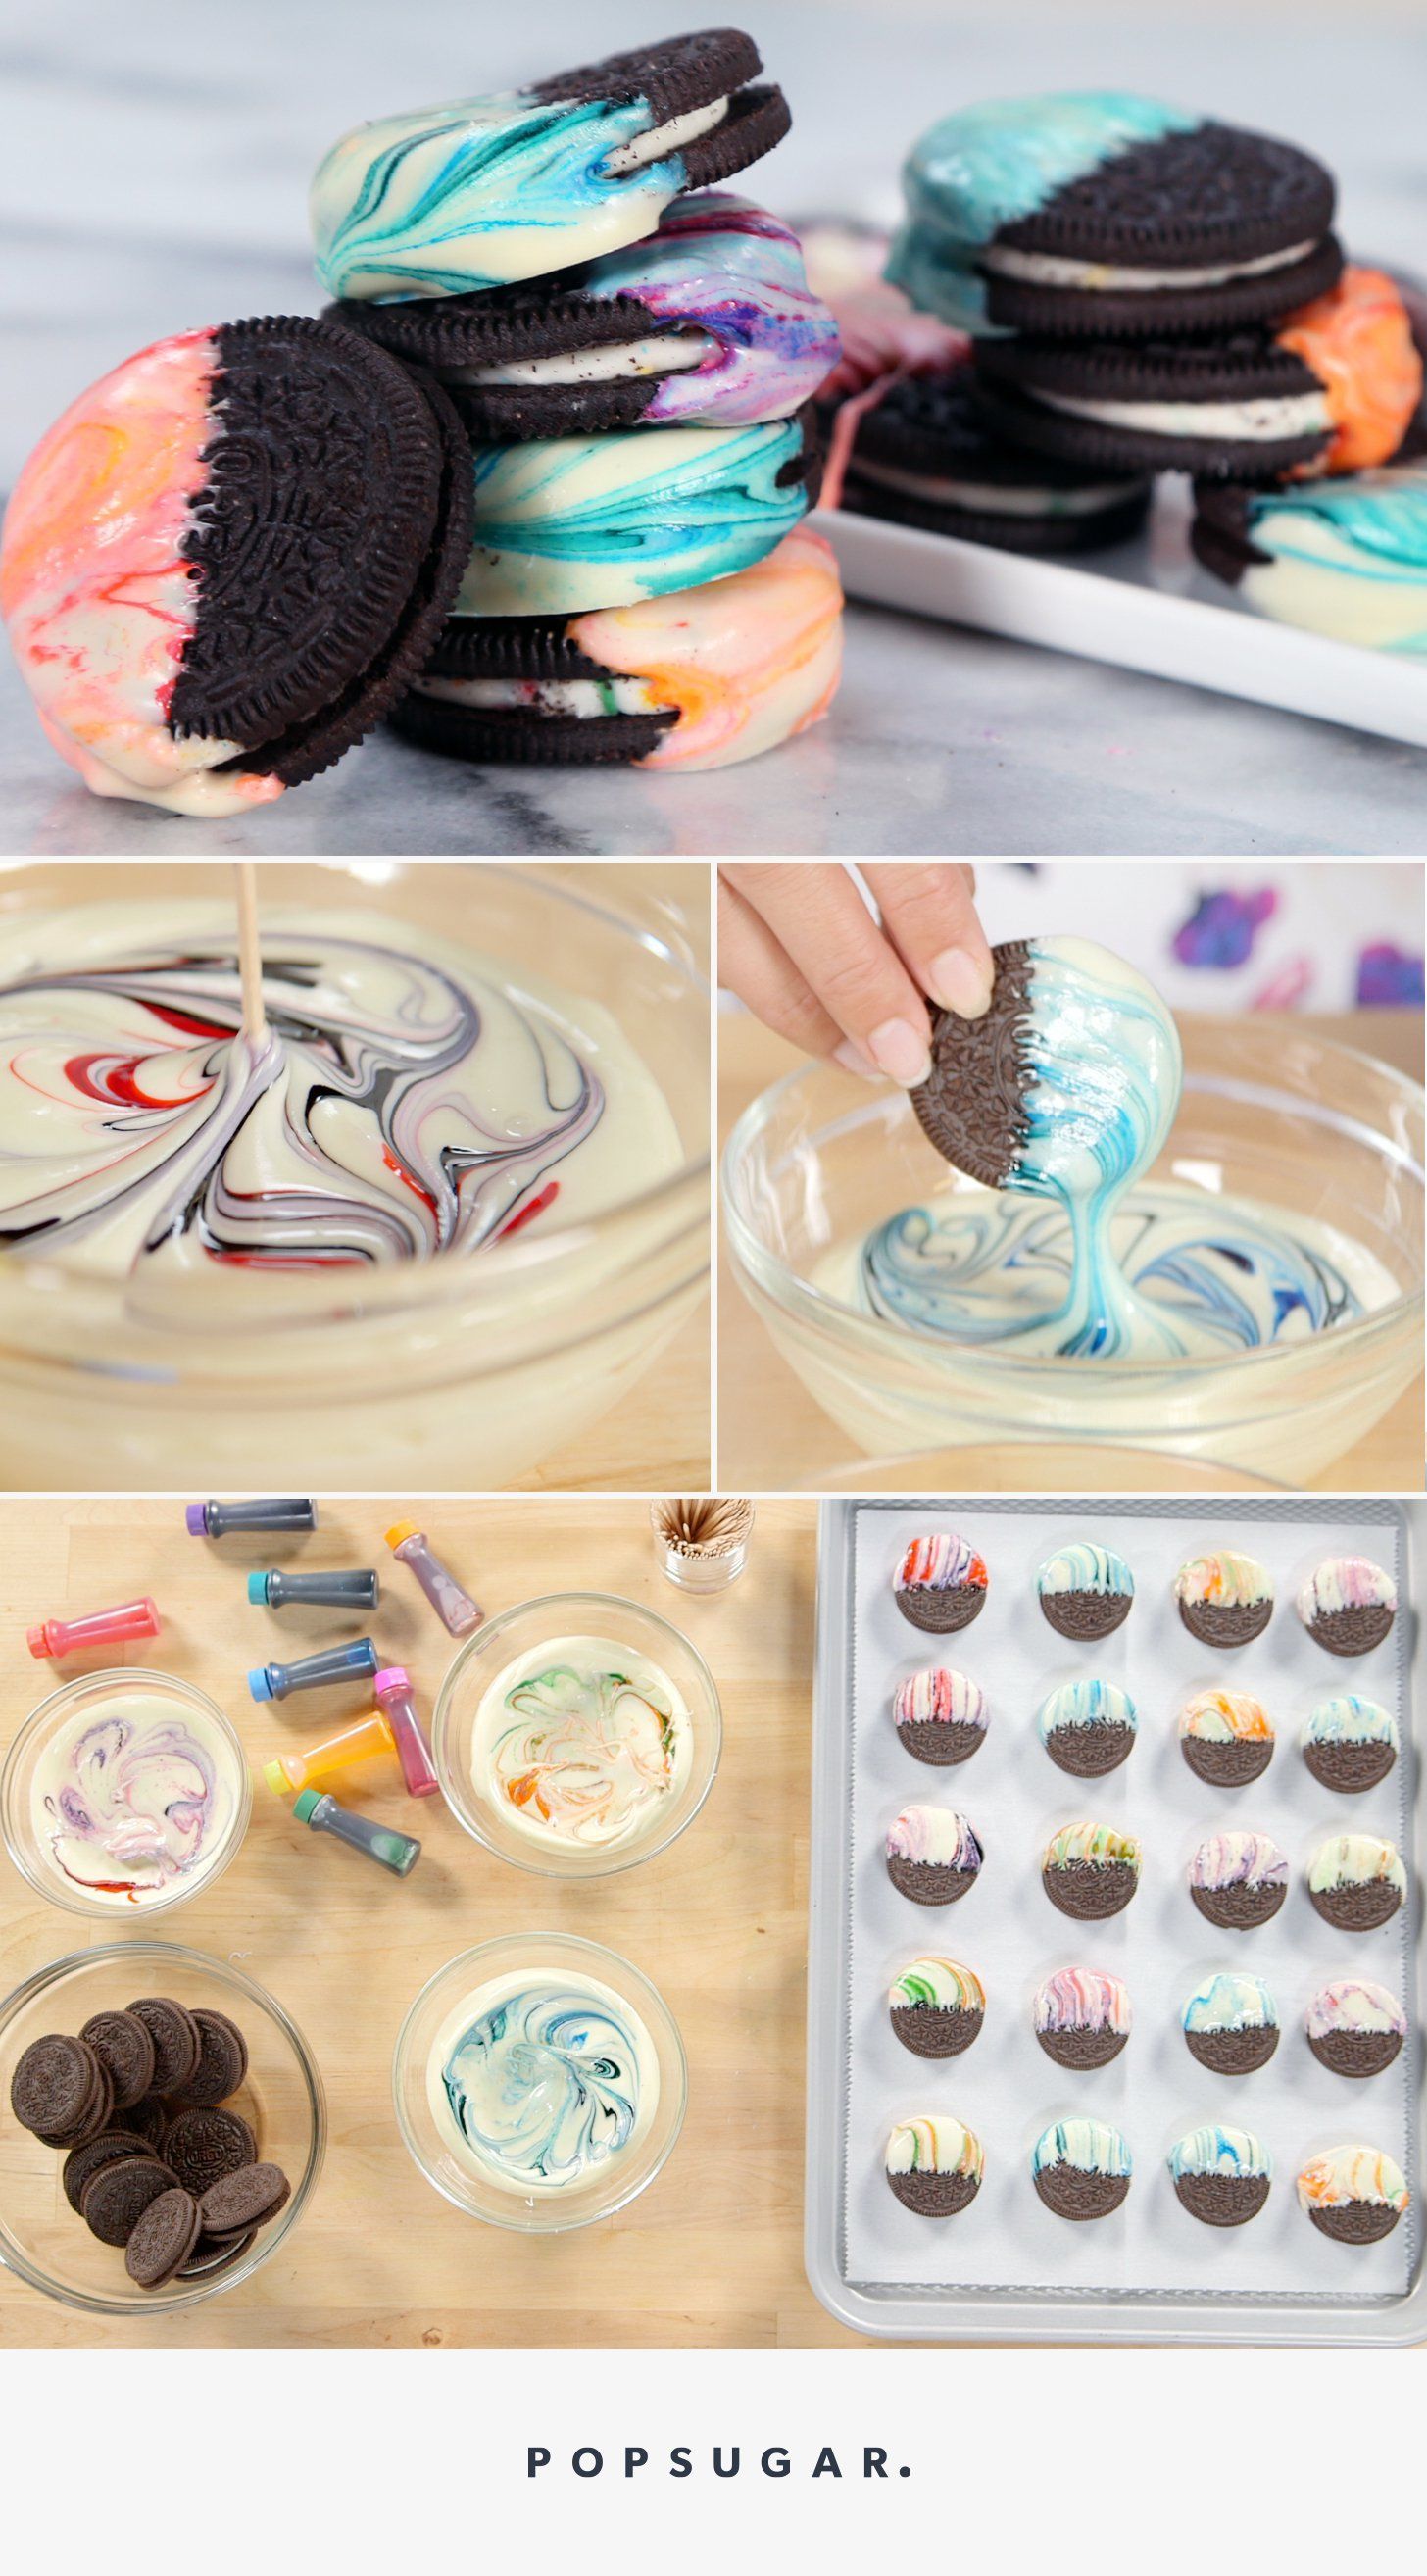 Lose Yourself to These Tie-Dye Oreos - Lose Yourself to These Tie-Dye Oreos -   13 diy Food for sale ideas